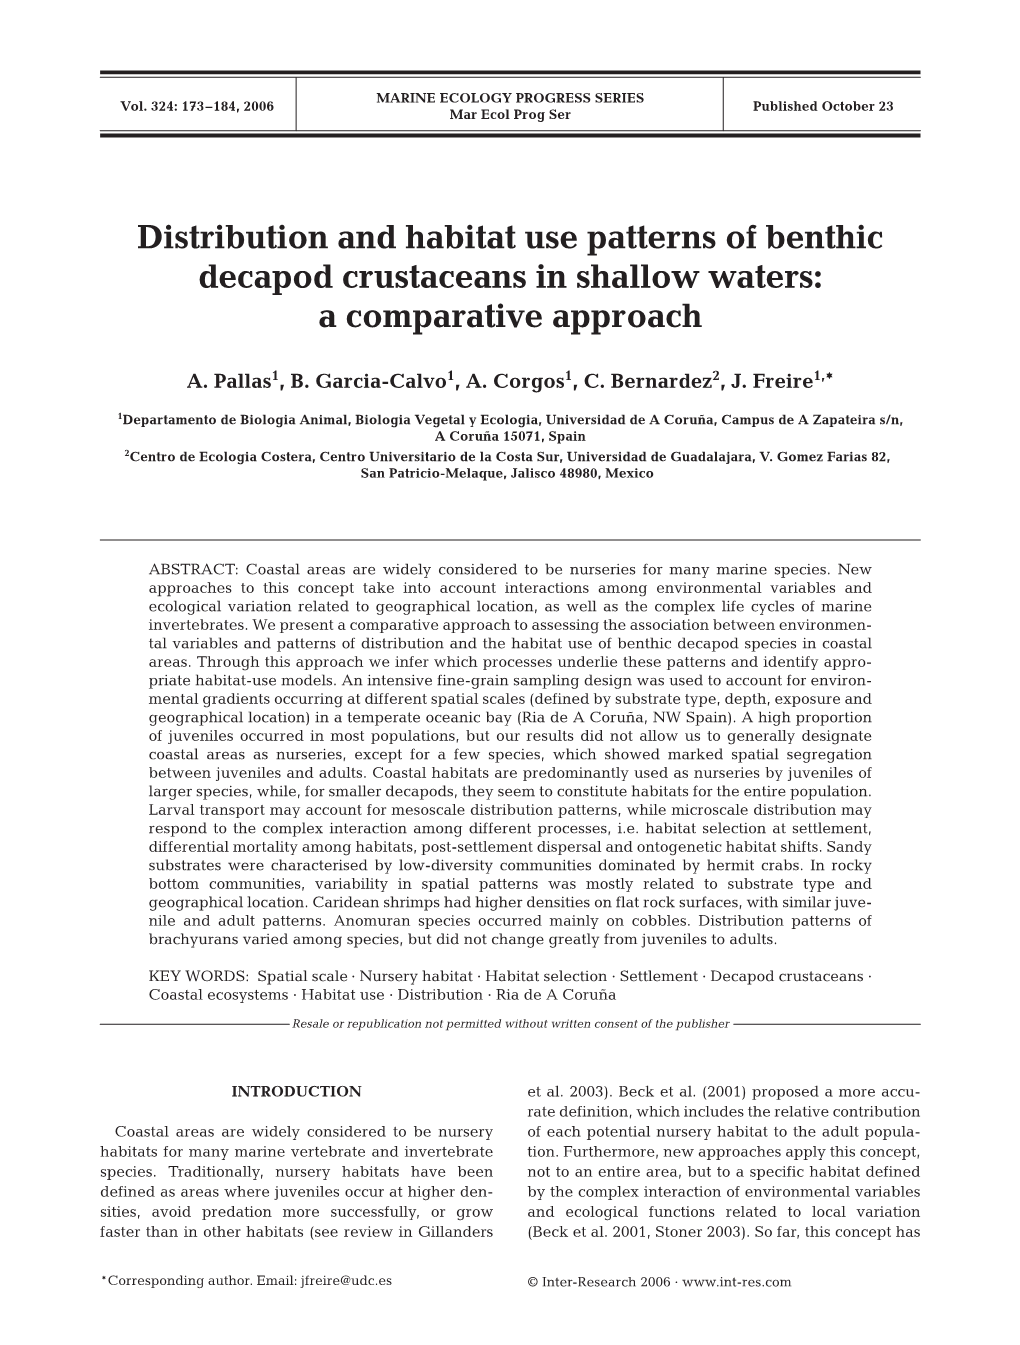 Distribution and Habitat Use Patterns of Benthic Decapod Crustaceans in Shallow Waters: a Comparative Approach